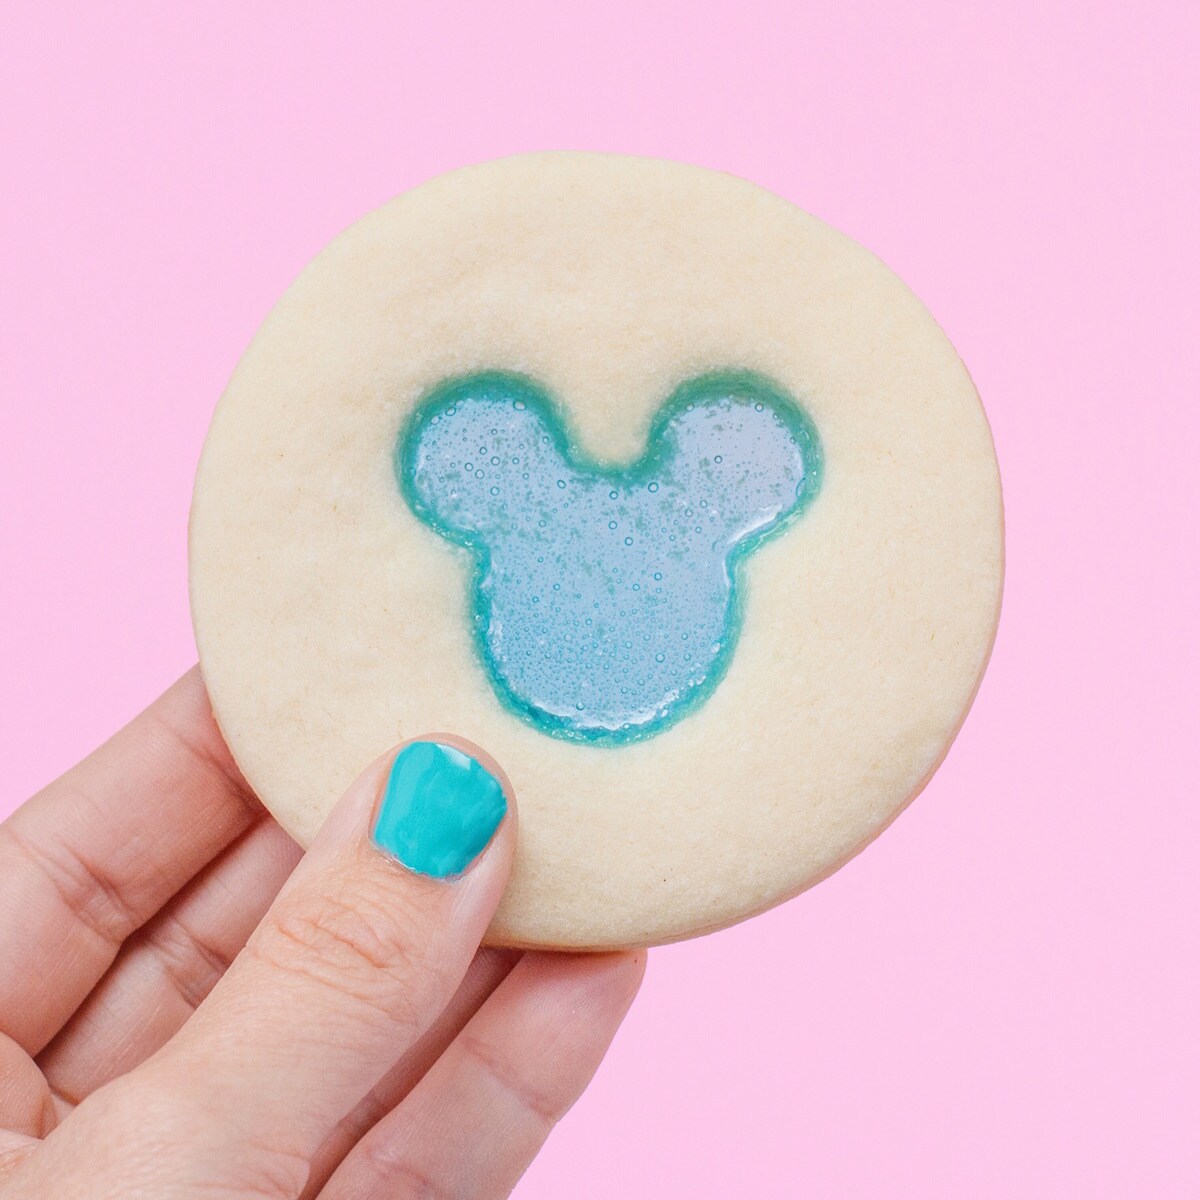 A hand holds up a cookie with a translucent blue Mickey Mouse head in the center.